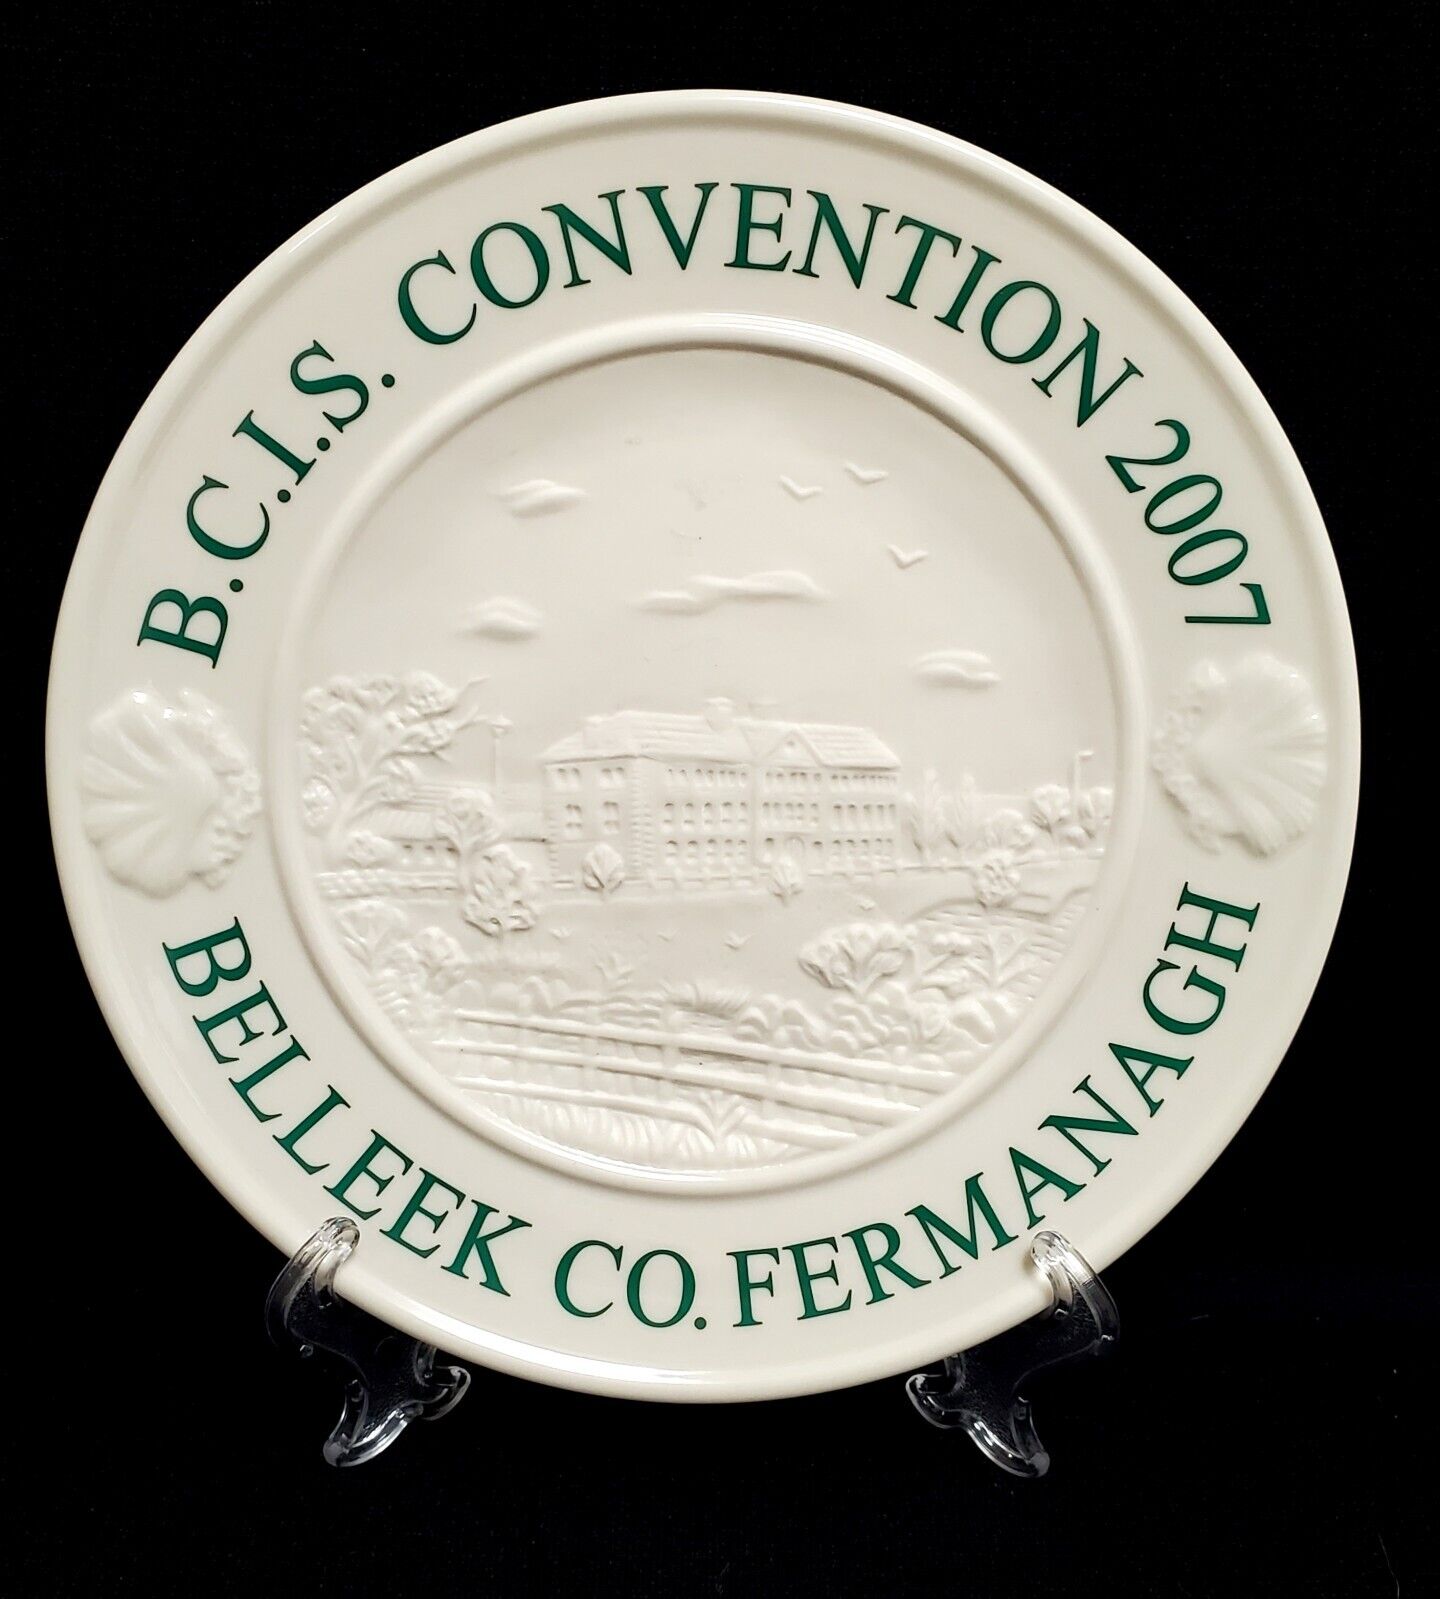 B.C.I.S. Convention 2007 Belleek Co. Fermanagh plate